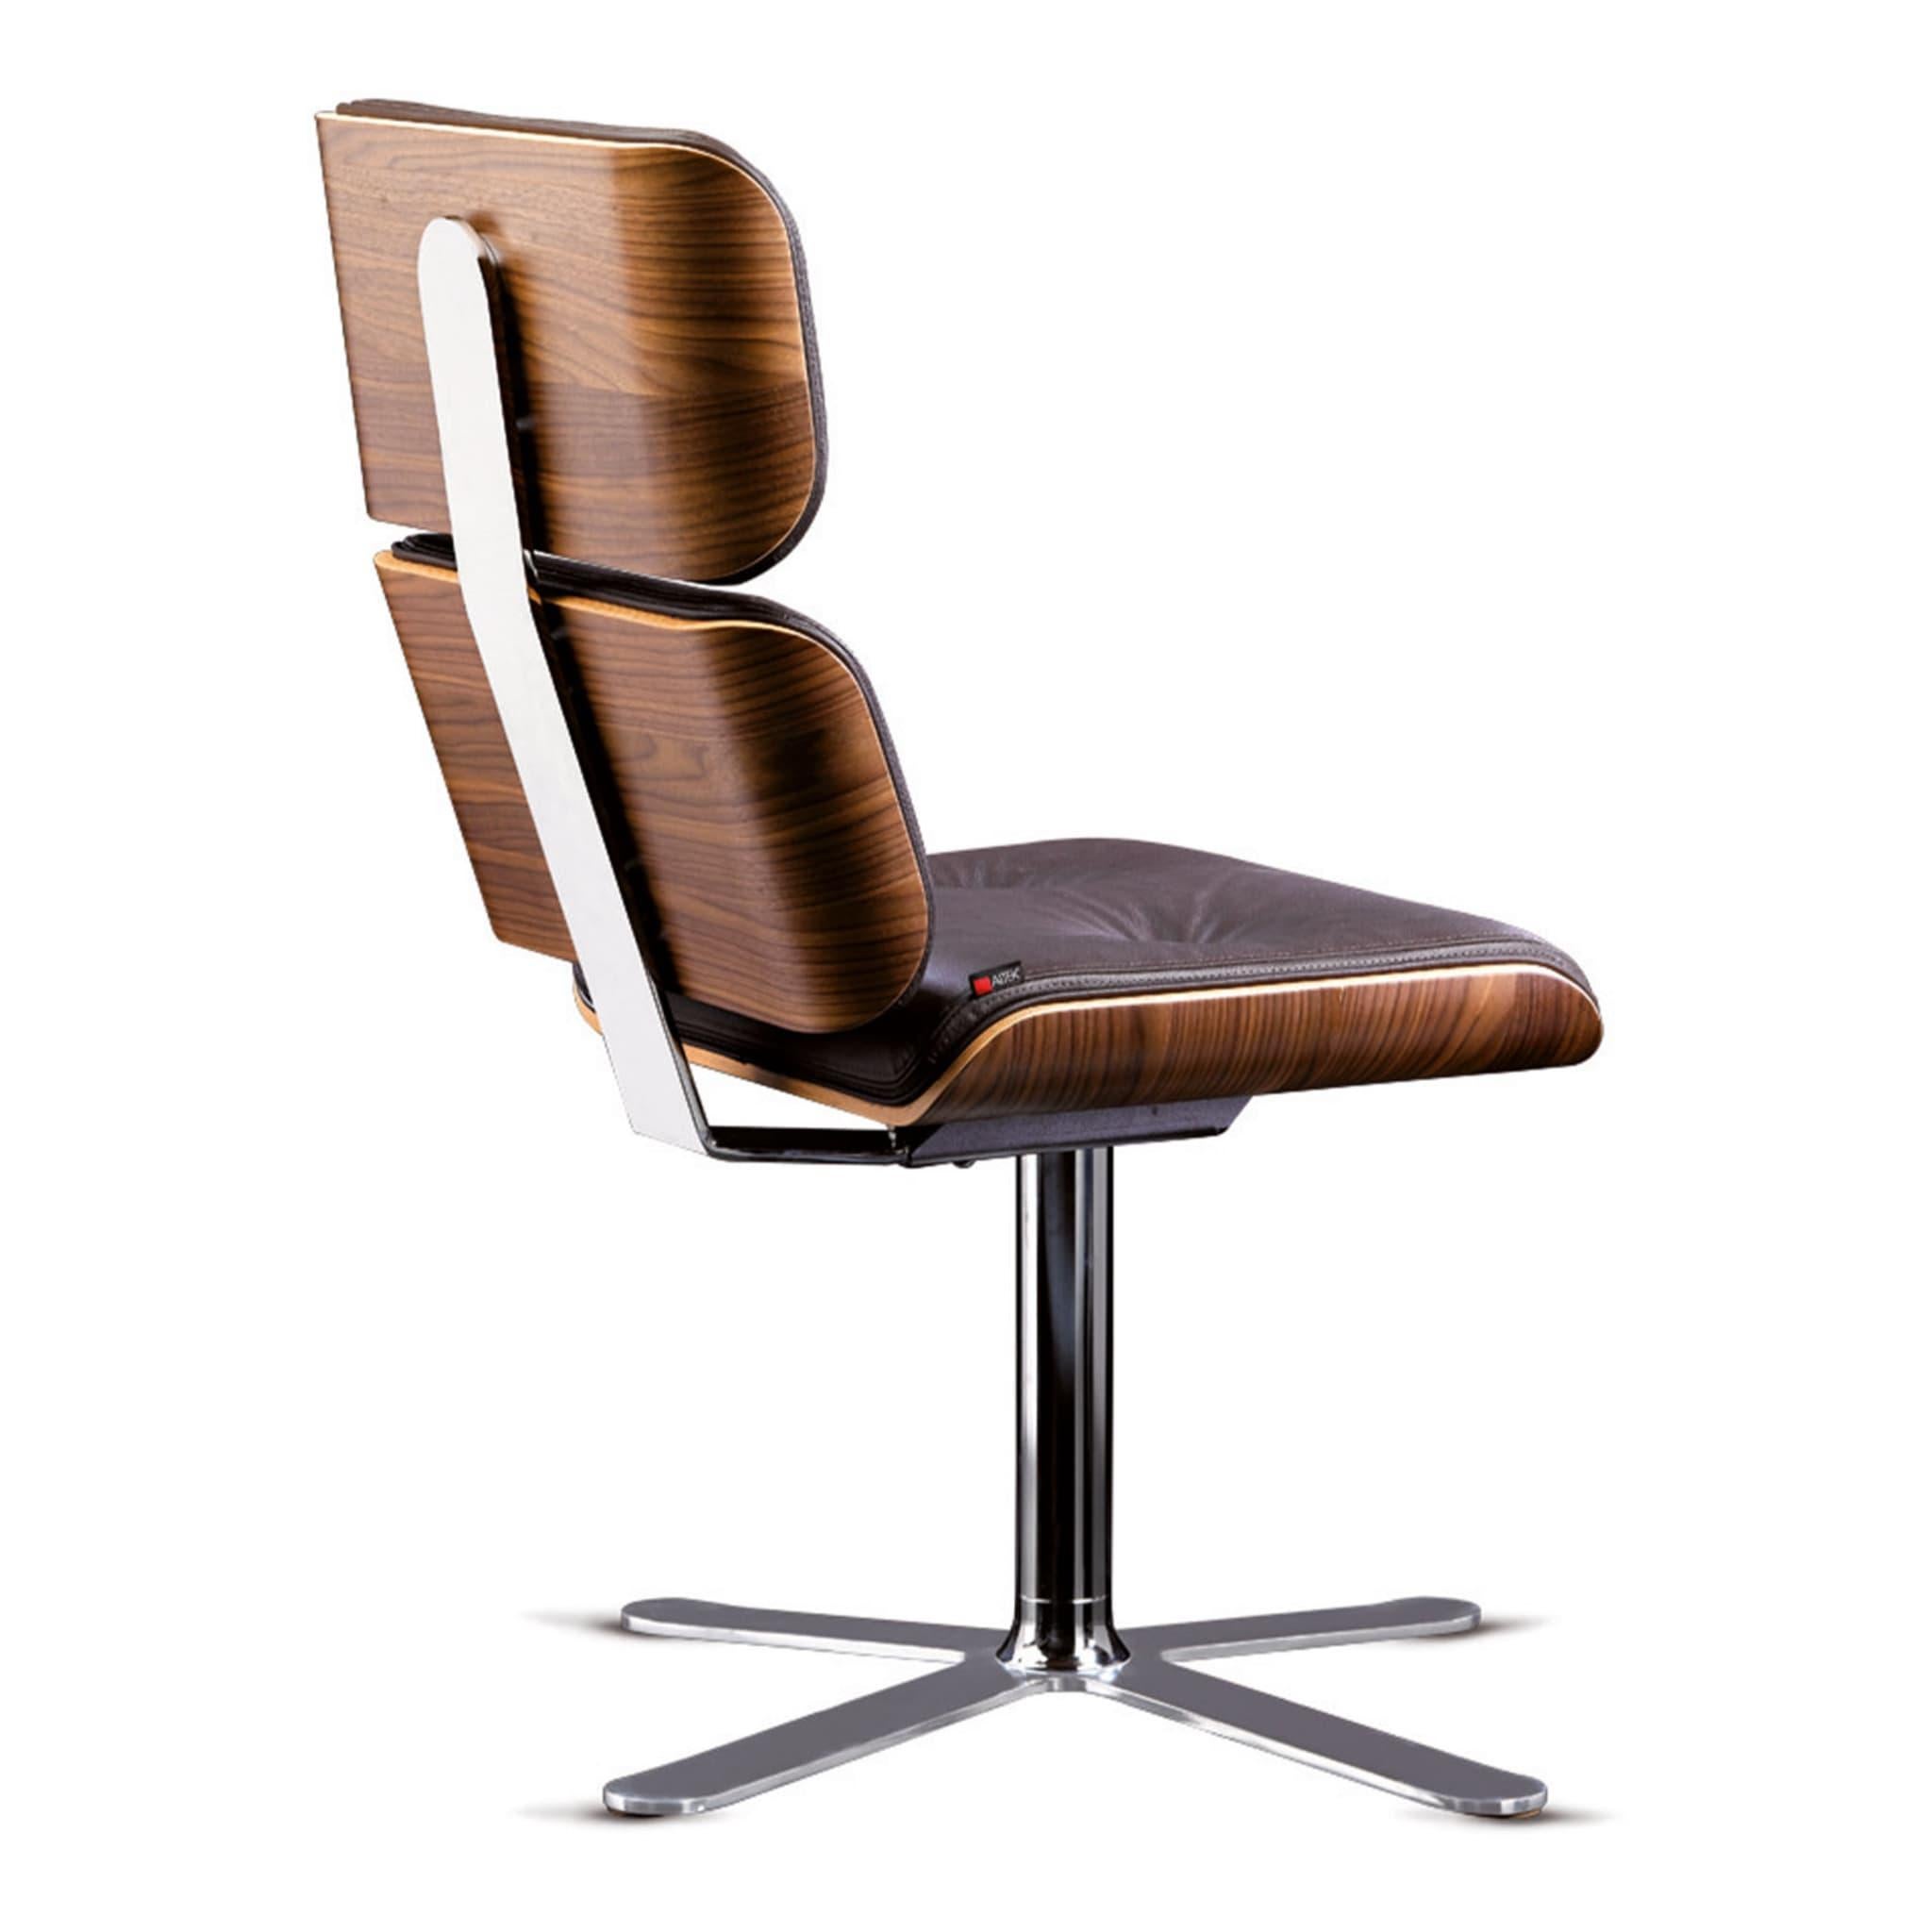 Intrinsically modern, this sleek and elegant office chair is the epitome of comfort. This exclusive design by Rainer Bachshmid features two curved elements on the back and a larger one for the seat made of beech plywood veneer with a Canaletto